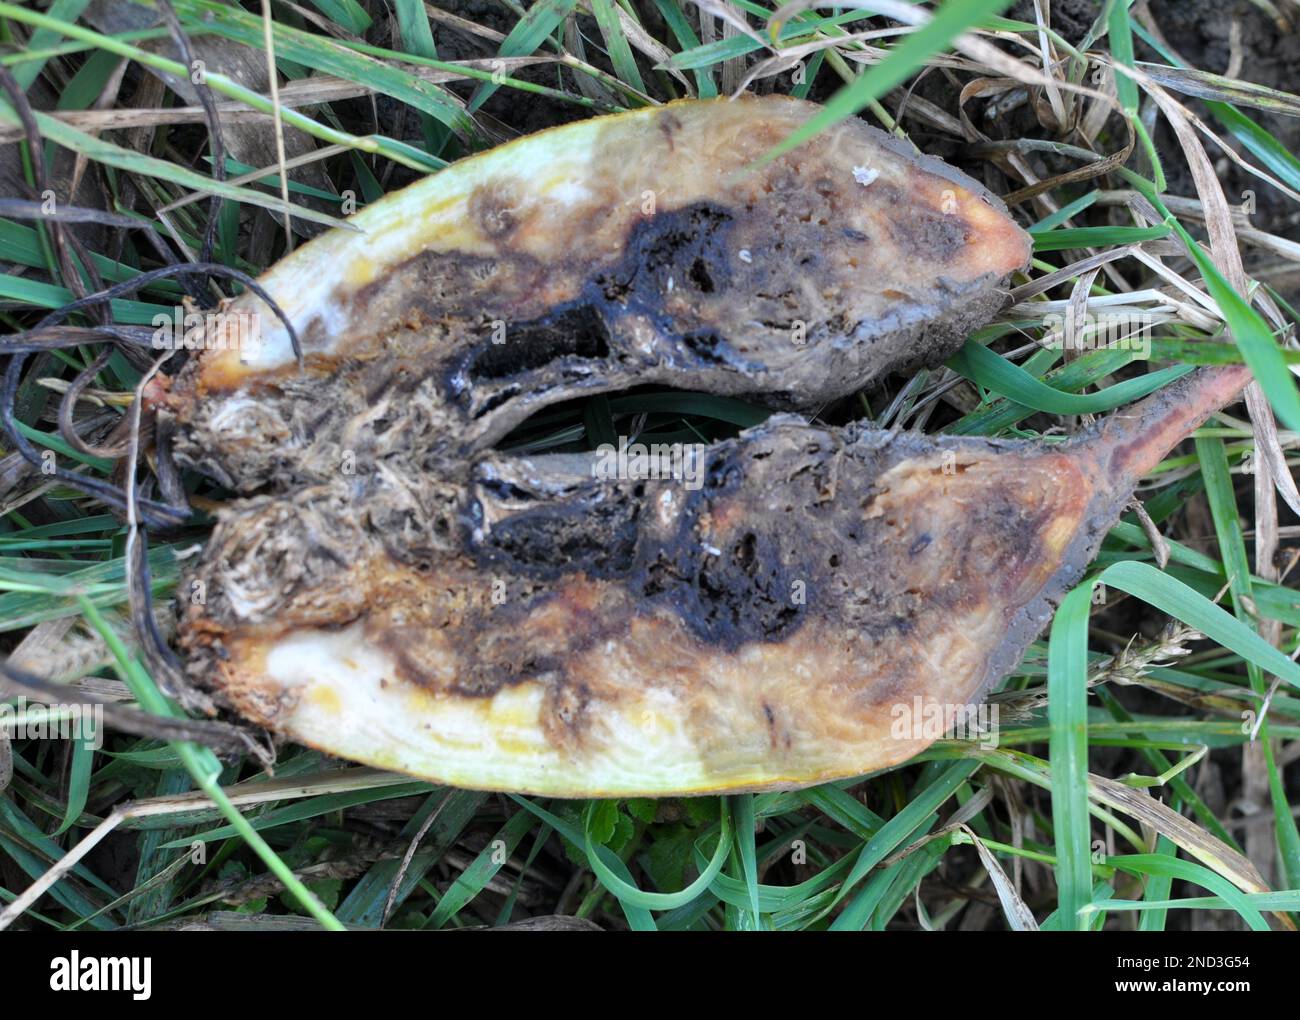 Ripe fodder beetroot affected by root rot Stock Photo